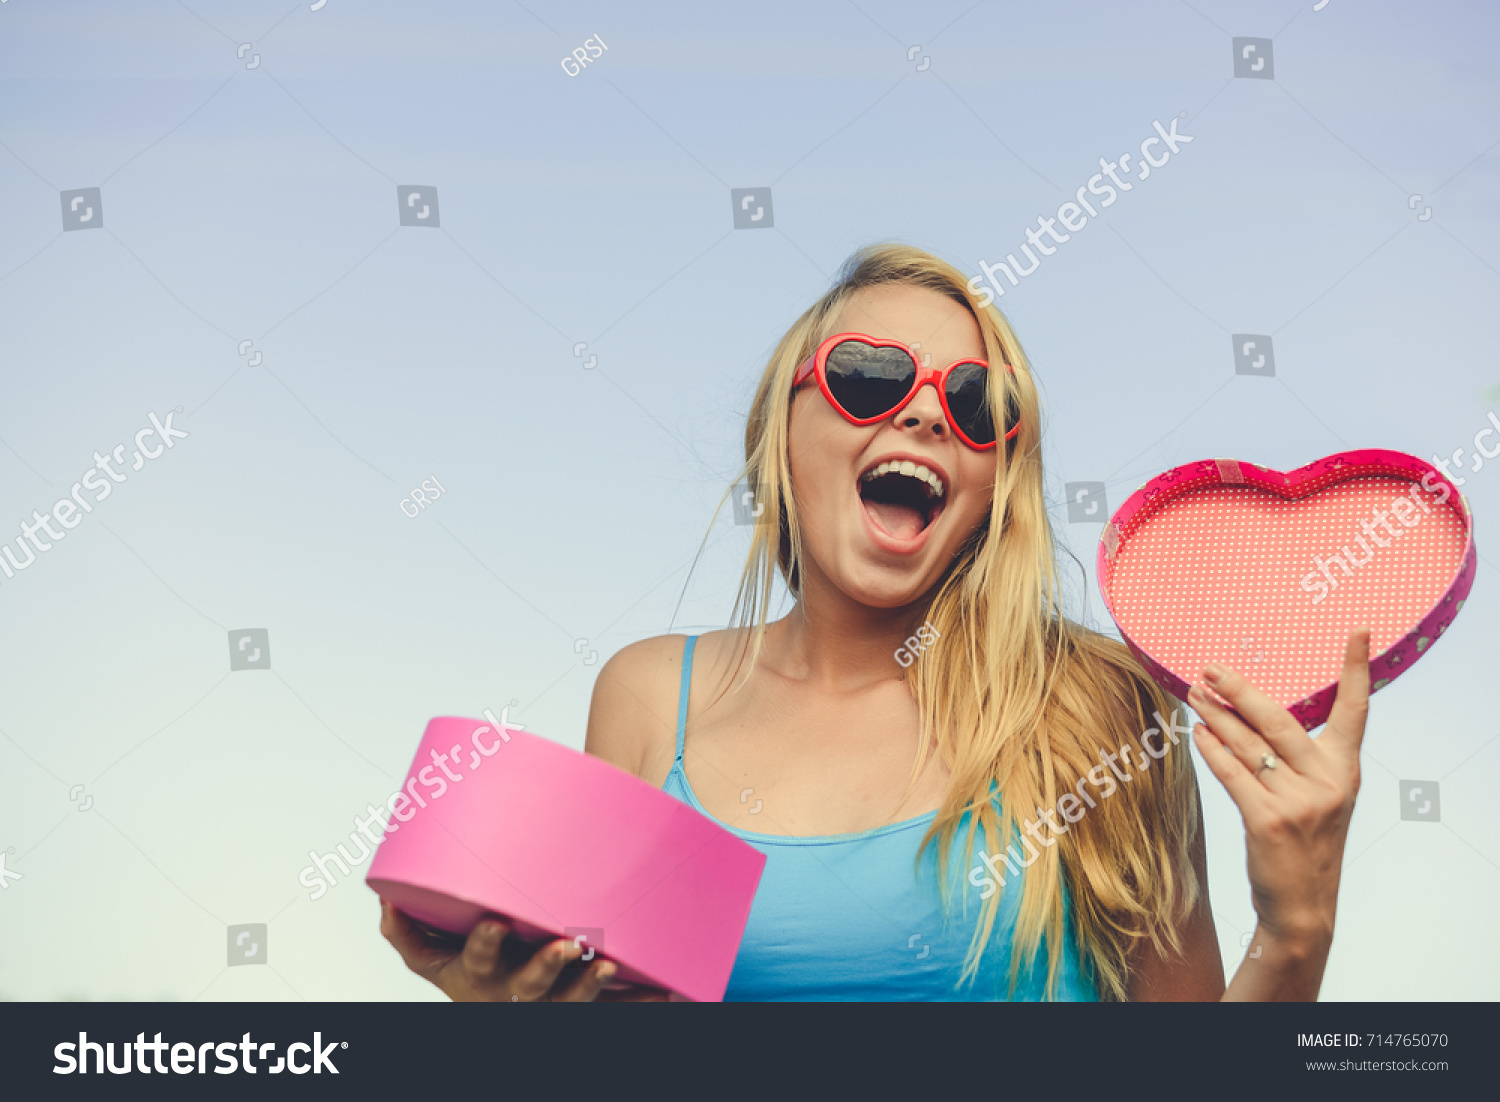 Joyful excited lovely woman holding heart shaped gift box in hands. Happy smiling surprised young lady over light blue sky background. Excitement beauty celebrating moment #714765070